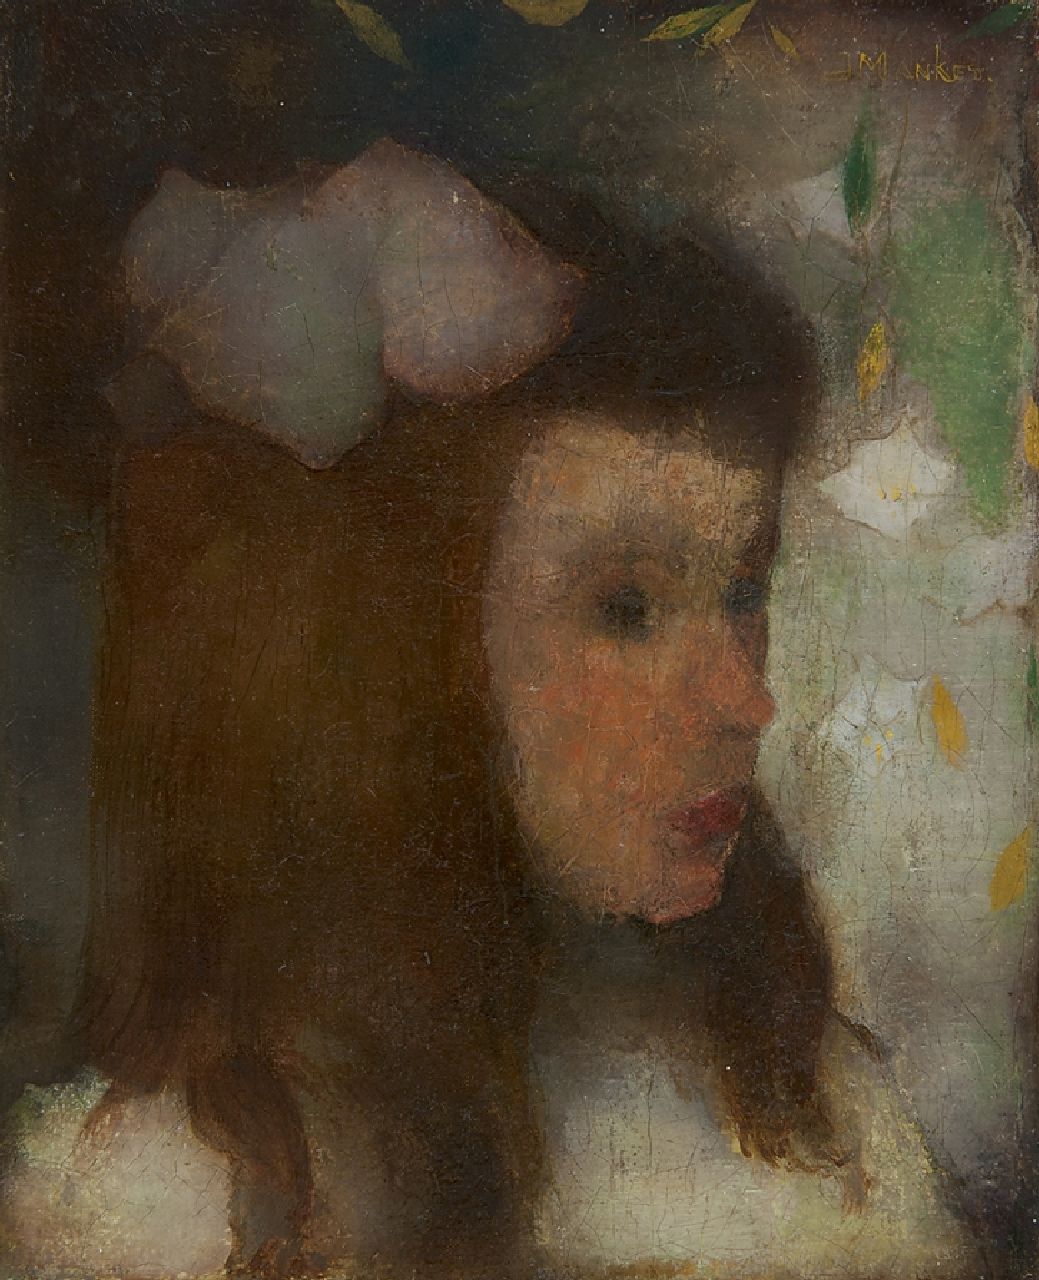 Mankes J.  | Jan Mankes, Portrait of a young girl, oil on canvas 20.0 x 16.3 cm, signed u.r. and painted ca. 1911